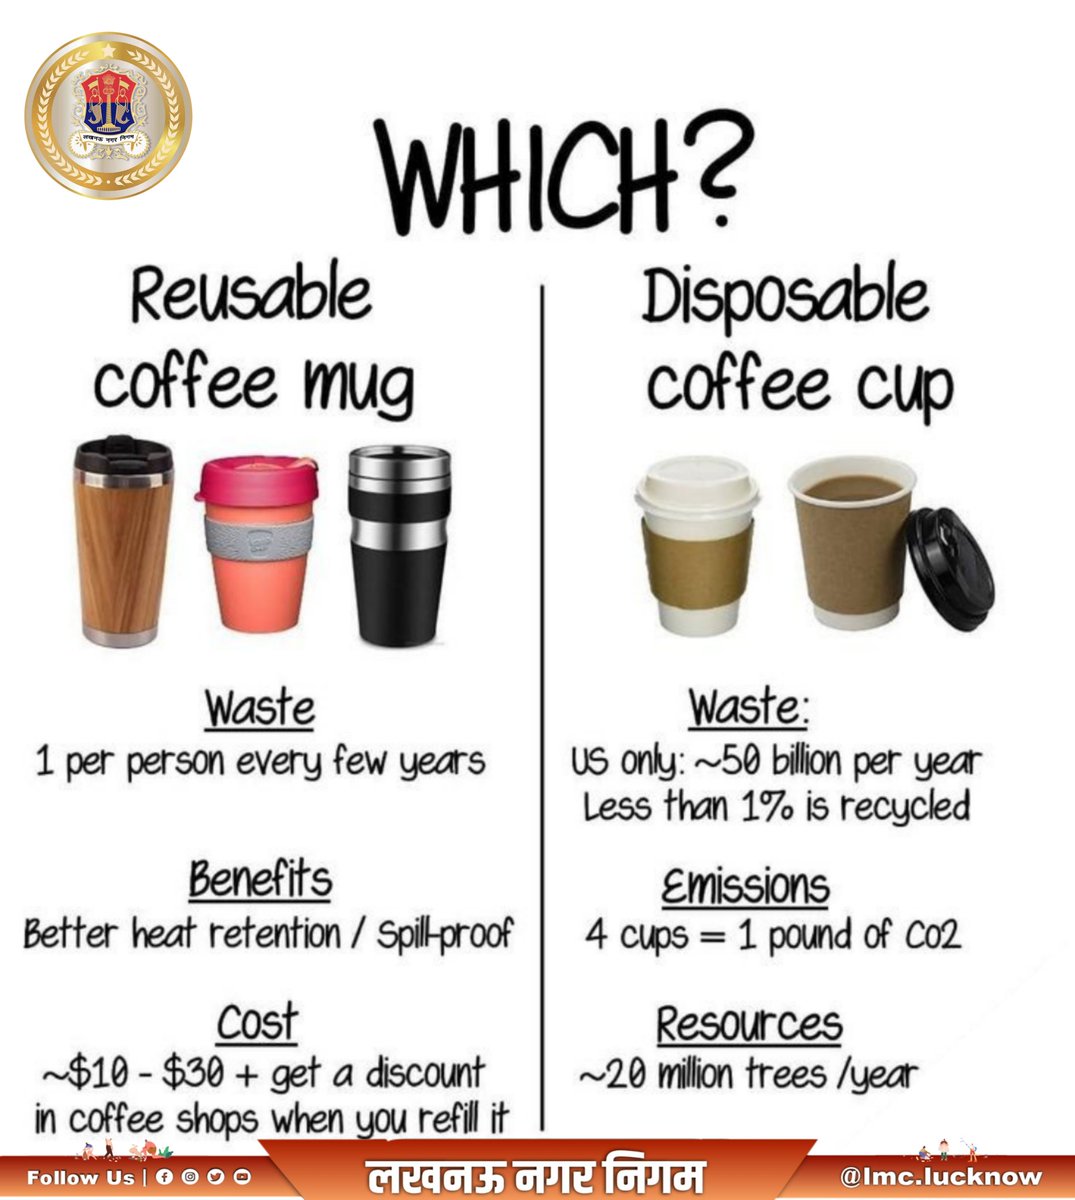 The impact of disposable coffee cups on the environment is staggering. With around 1 cup per person every few years, the waste and emissions add up quickly. Let's make a change for a more sustainable future. #reducewaste #ecoconscious